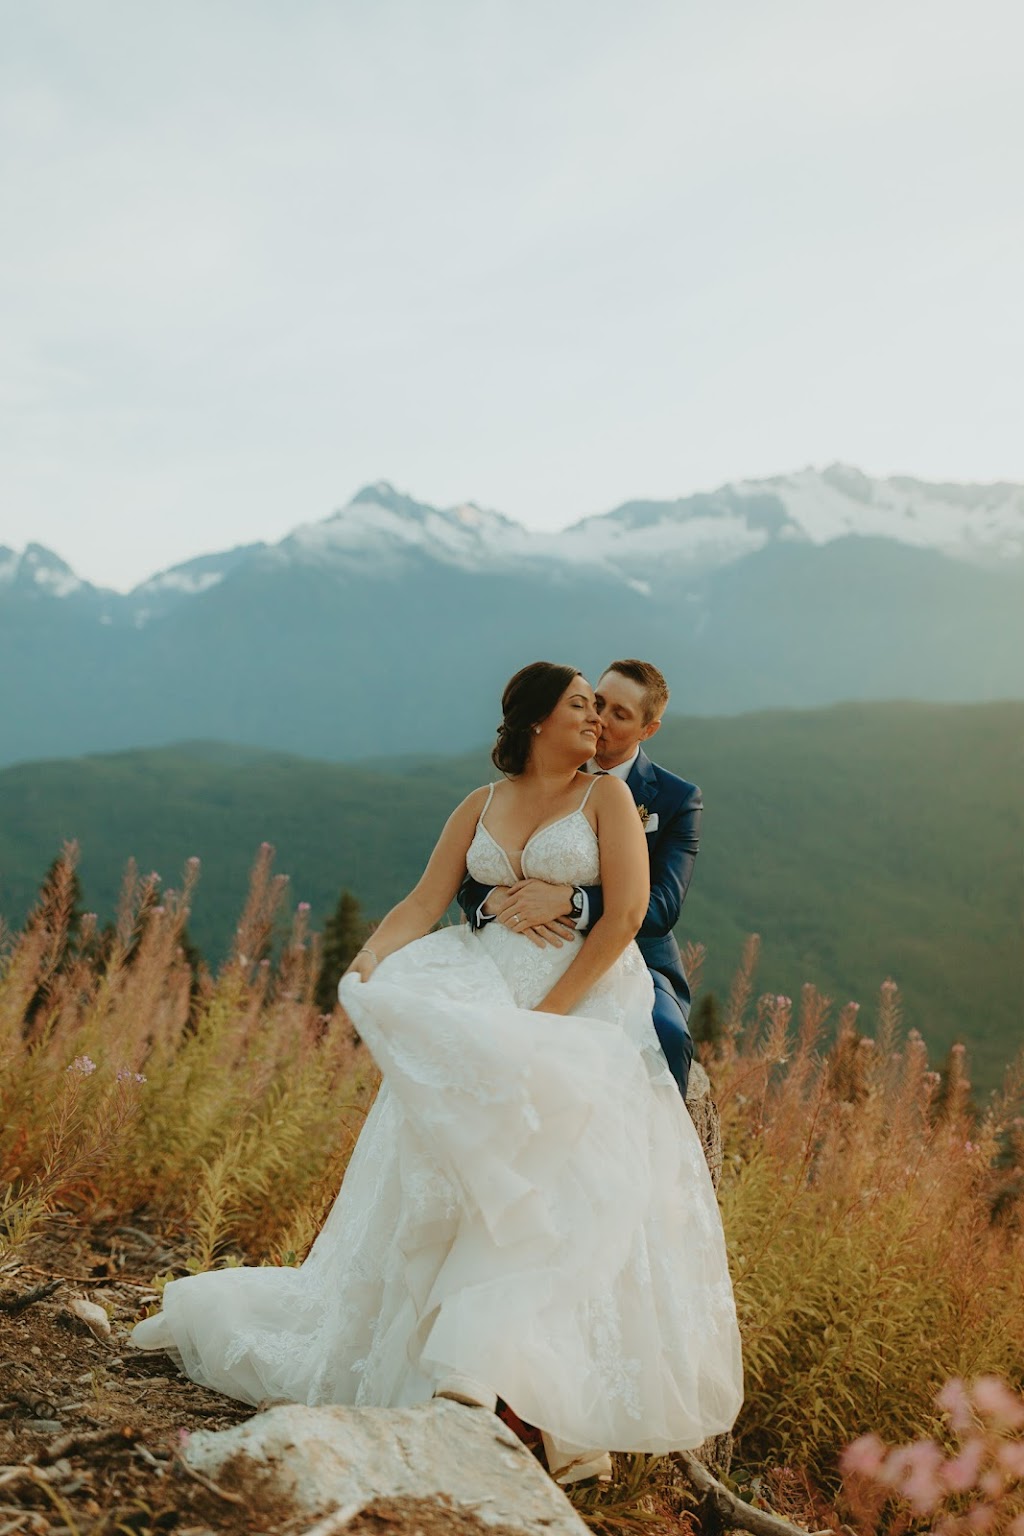 Angie Gallant Photography | 39768 Government Rd #6, Squamish, BC V8B 0B3, Canada | Phone: (604) 815-7837